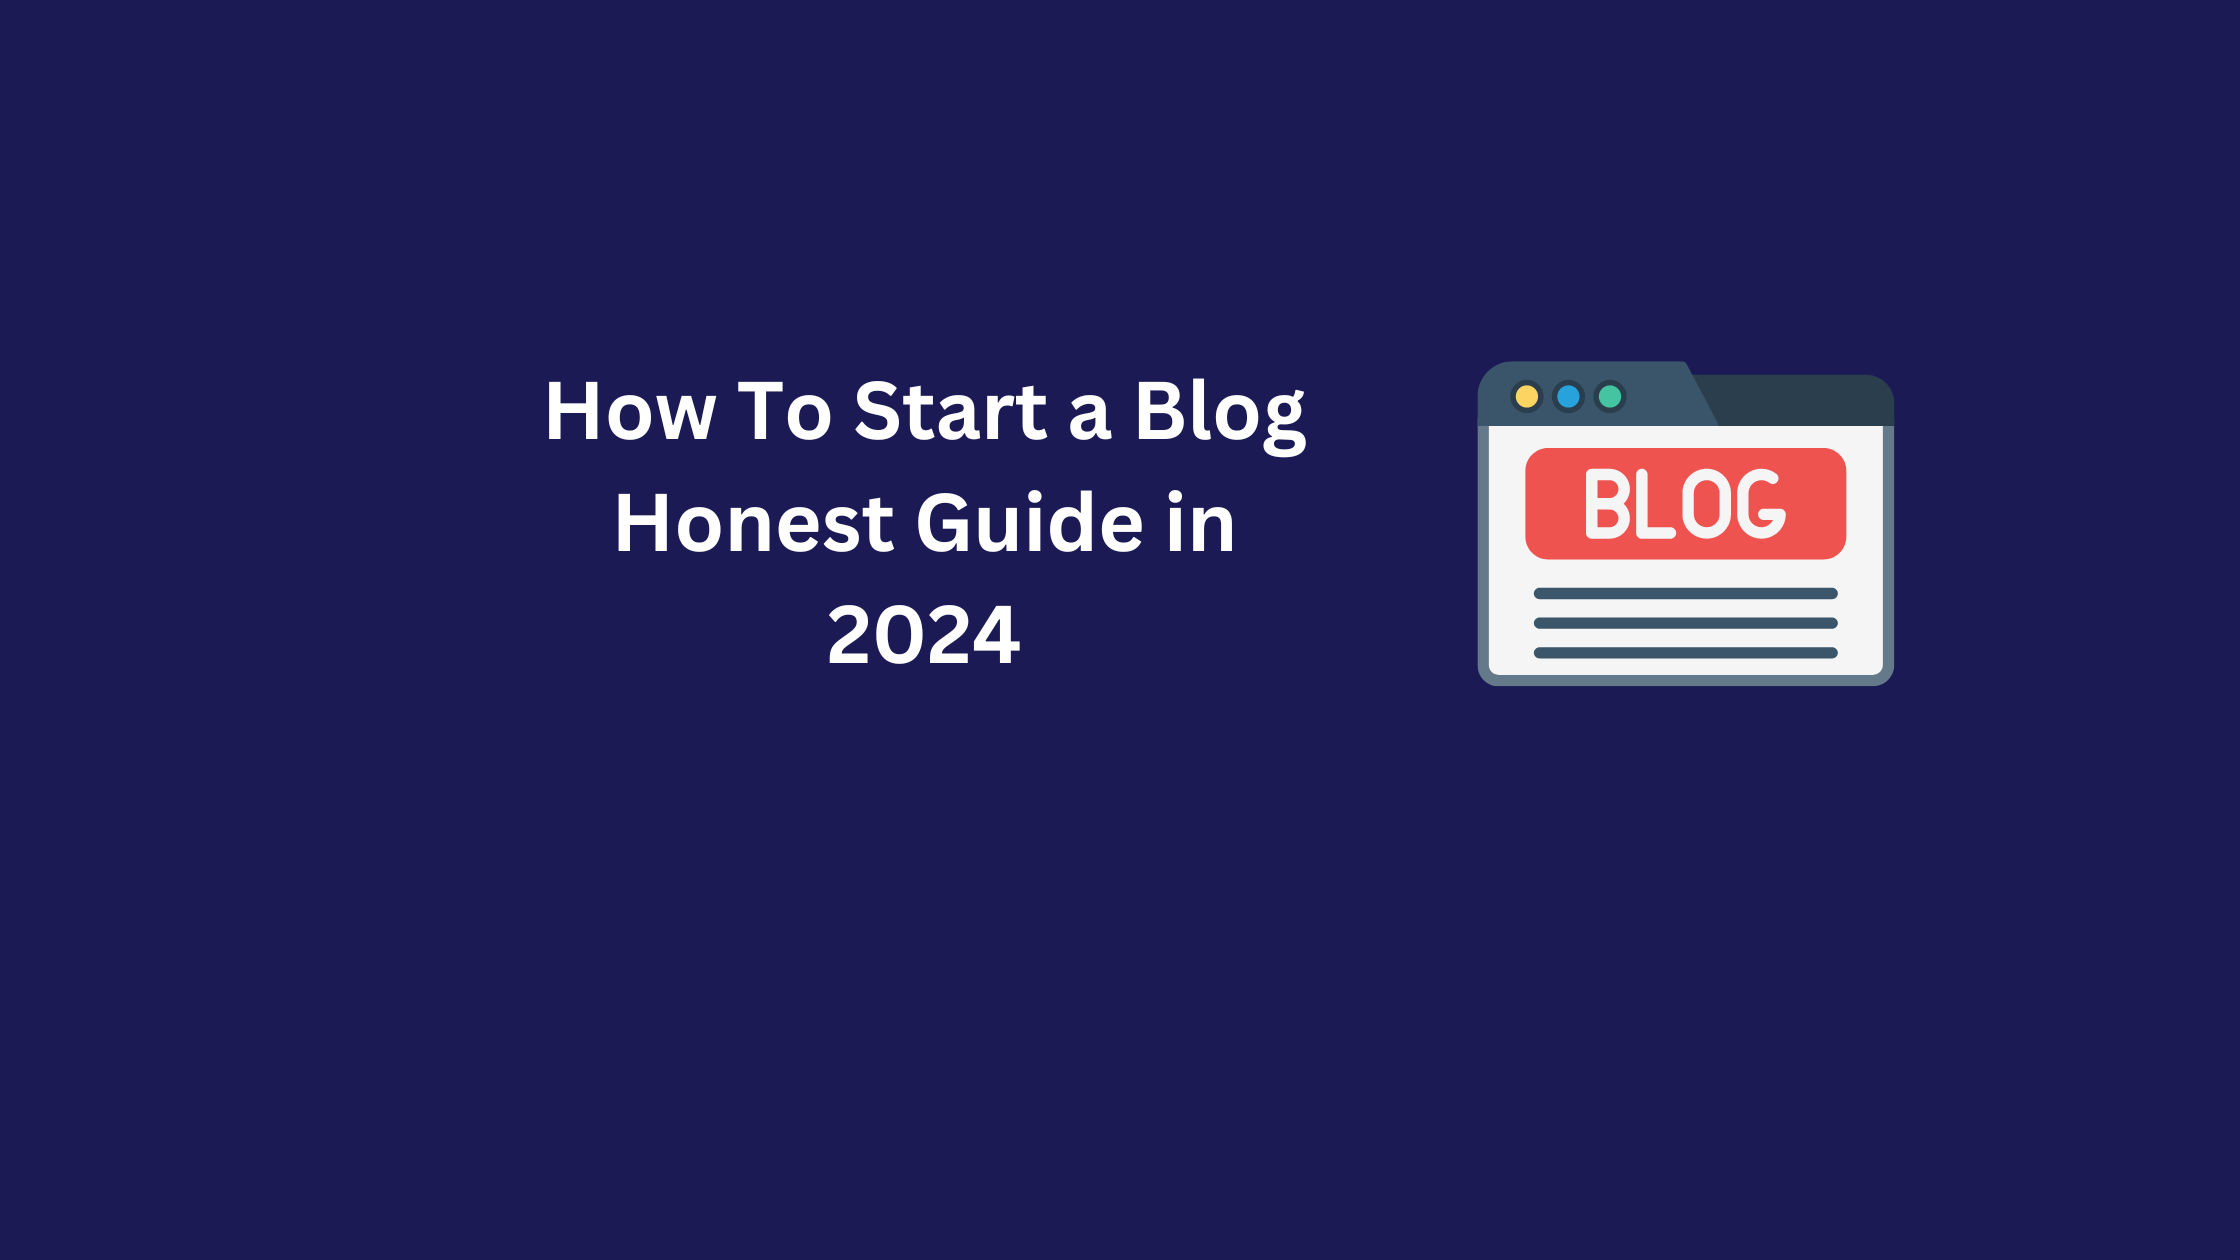 How To Start a Blog Honest Guide in 2024